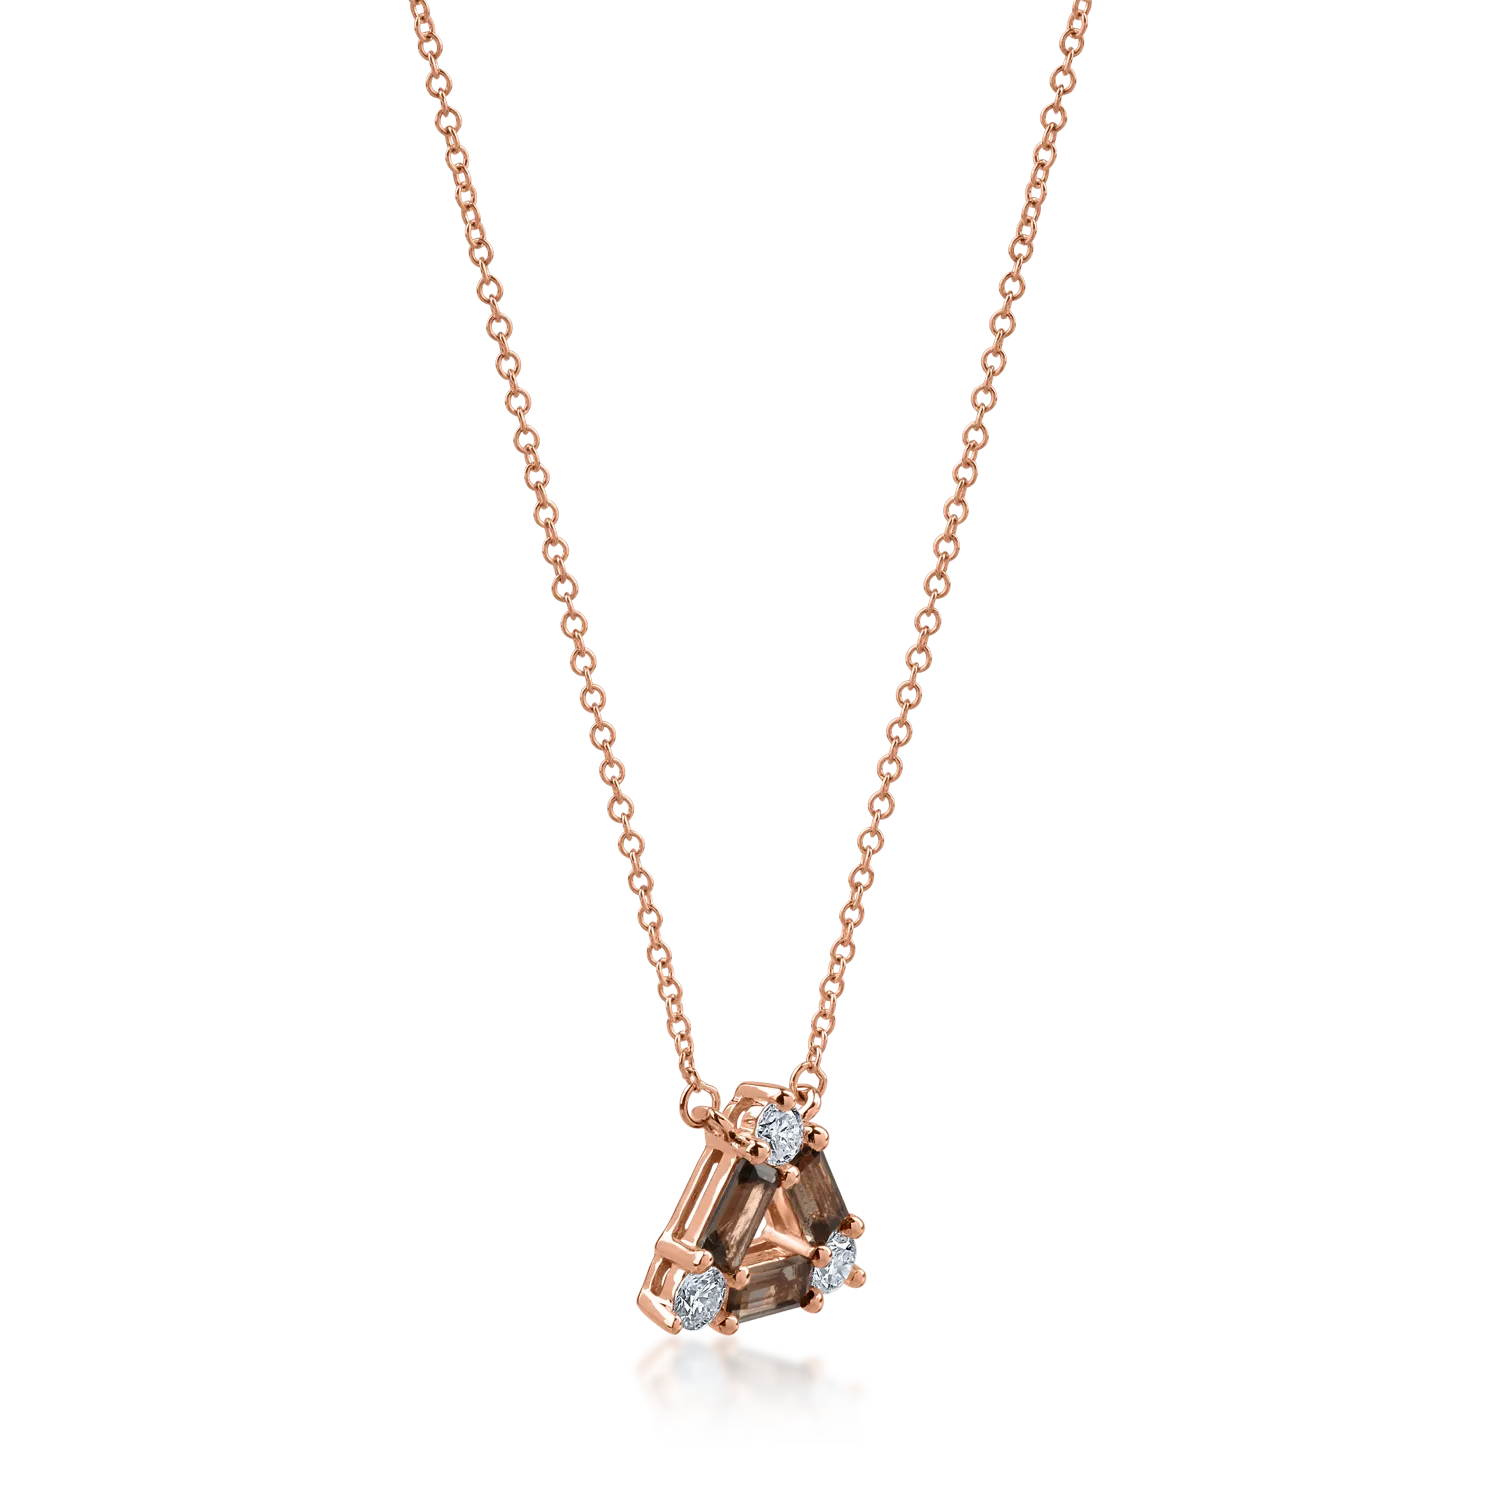 Rose gold pendant necklace with 0.29ct smoky quartz and 0.157ct diamonds